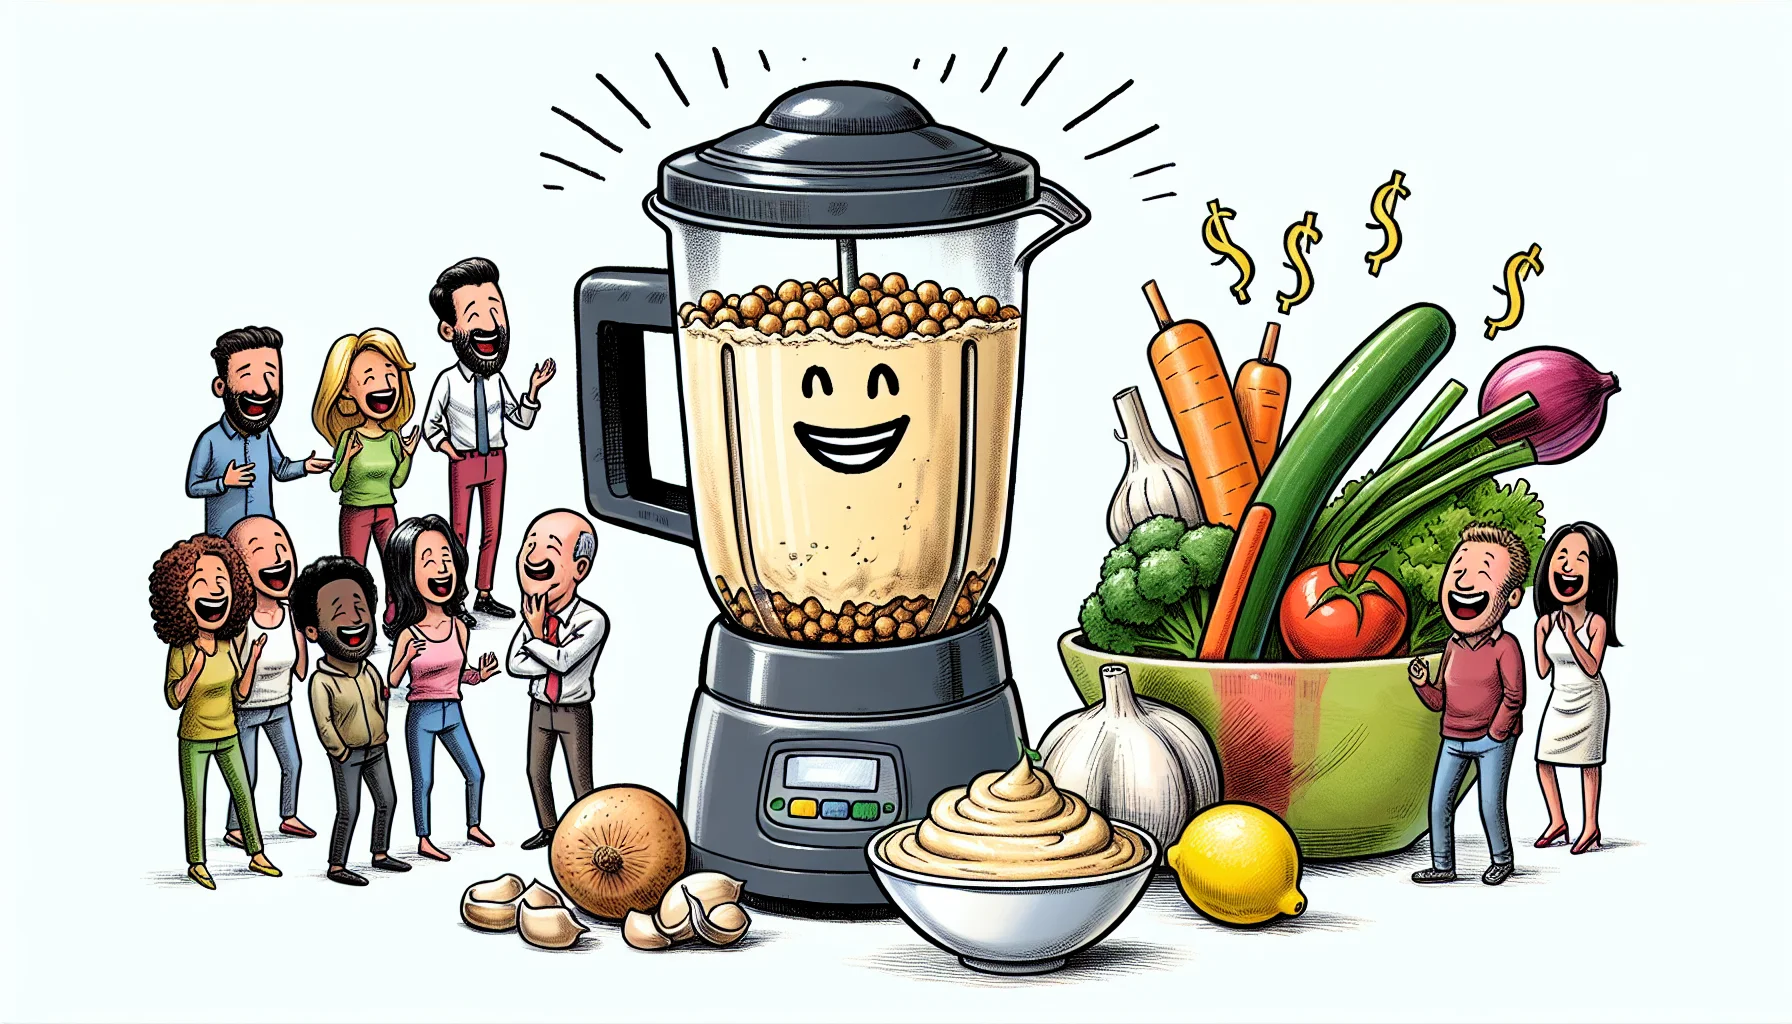 Illustrate a humorous and enticing scene aimed at promoting healthy eating on a budget. In the center, depict a blender full of creamy hummus made from affordable ingredients like chickpeas, tahini, lemon, garlic, and olive oil. Surrounding it, imagine people of different genders and descents having a good laugh while enjoying this homemade hummus with colorful vegetable sticks. Emphasize the richness and freshness of the ingredients and the joy from eating healthy without burning a hole in the pocket.